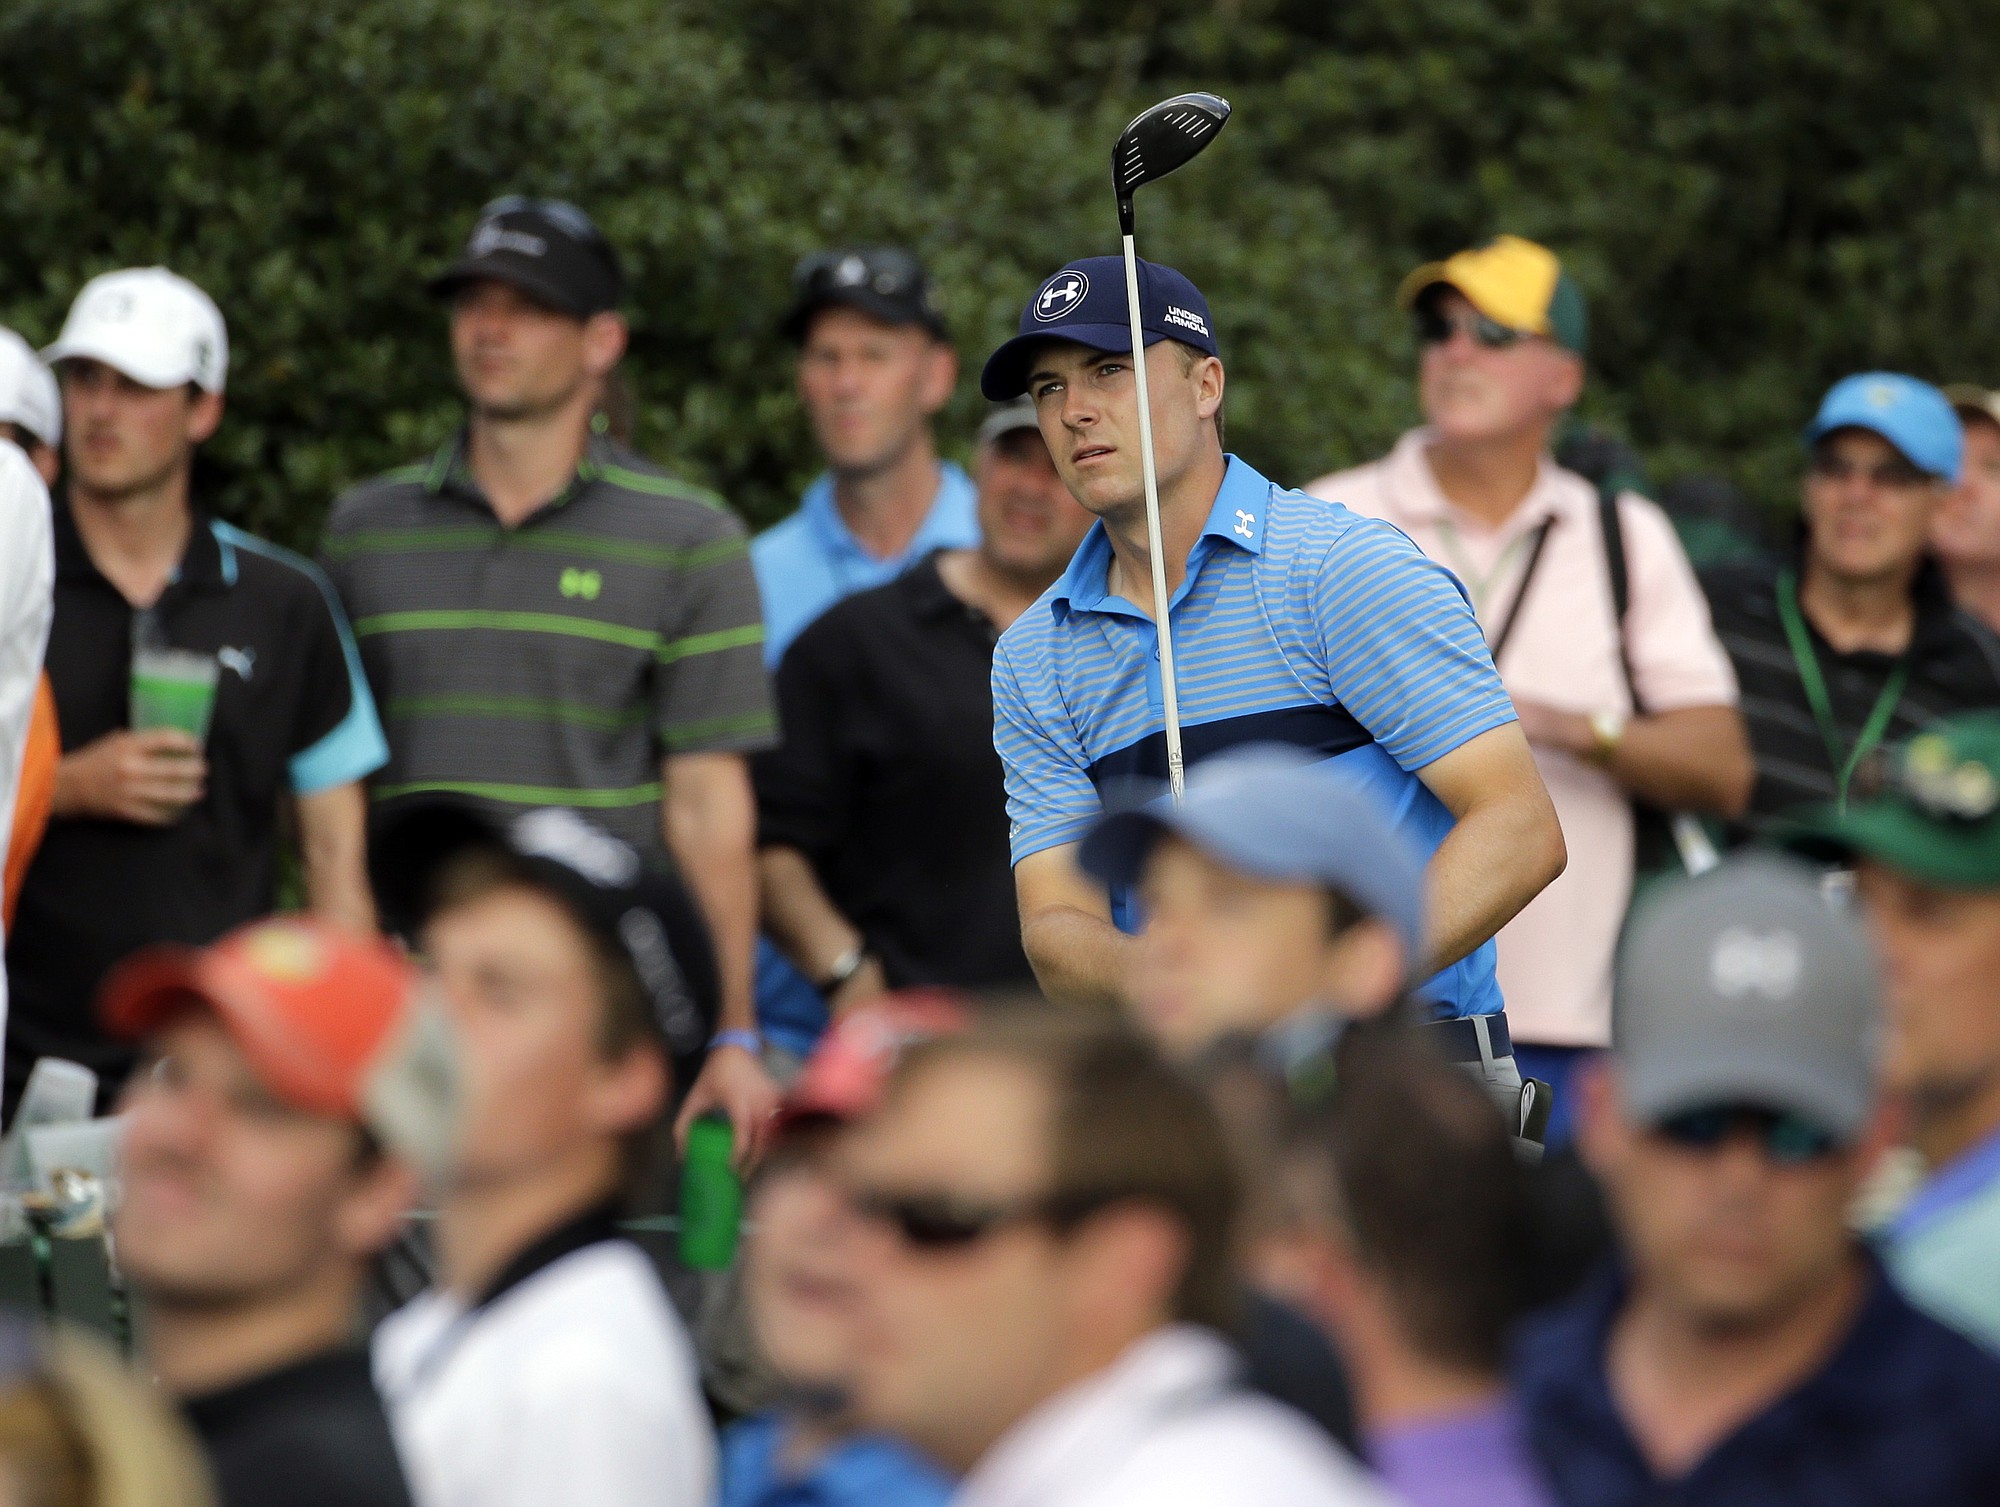 Jordan Spieth watches his tee shot on the 15th hole during the first round of the Masters golf tournament Thursday, April 9, 2015, in Augusta, Ga.